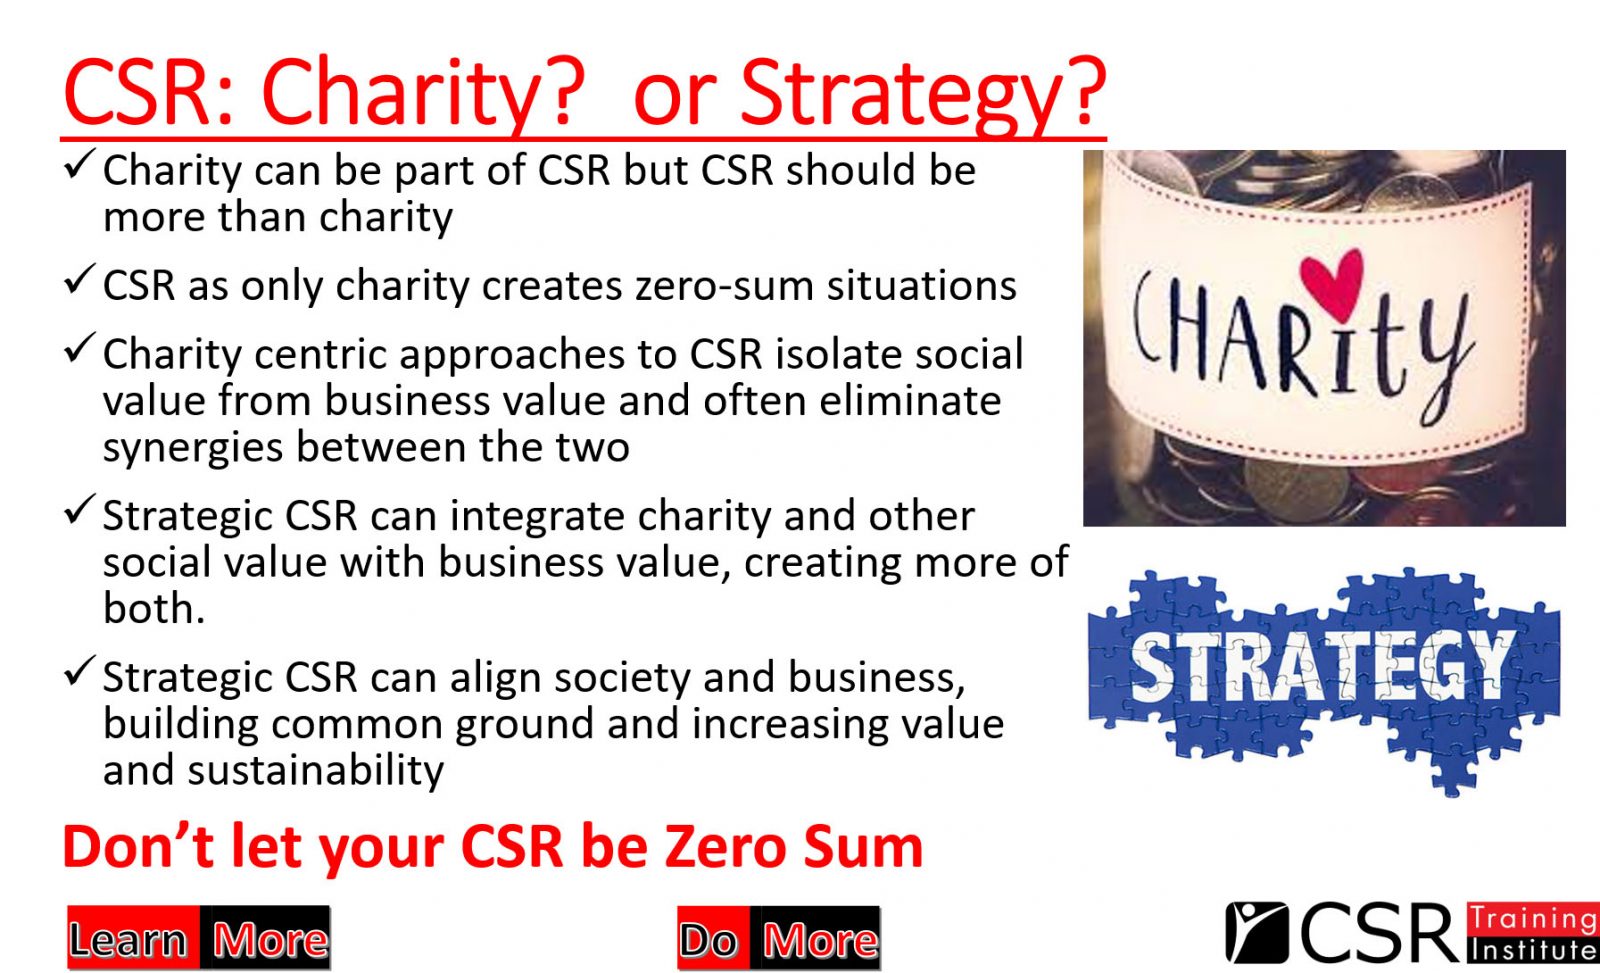 Charity or strategy?